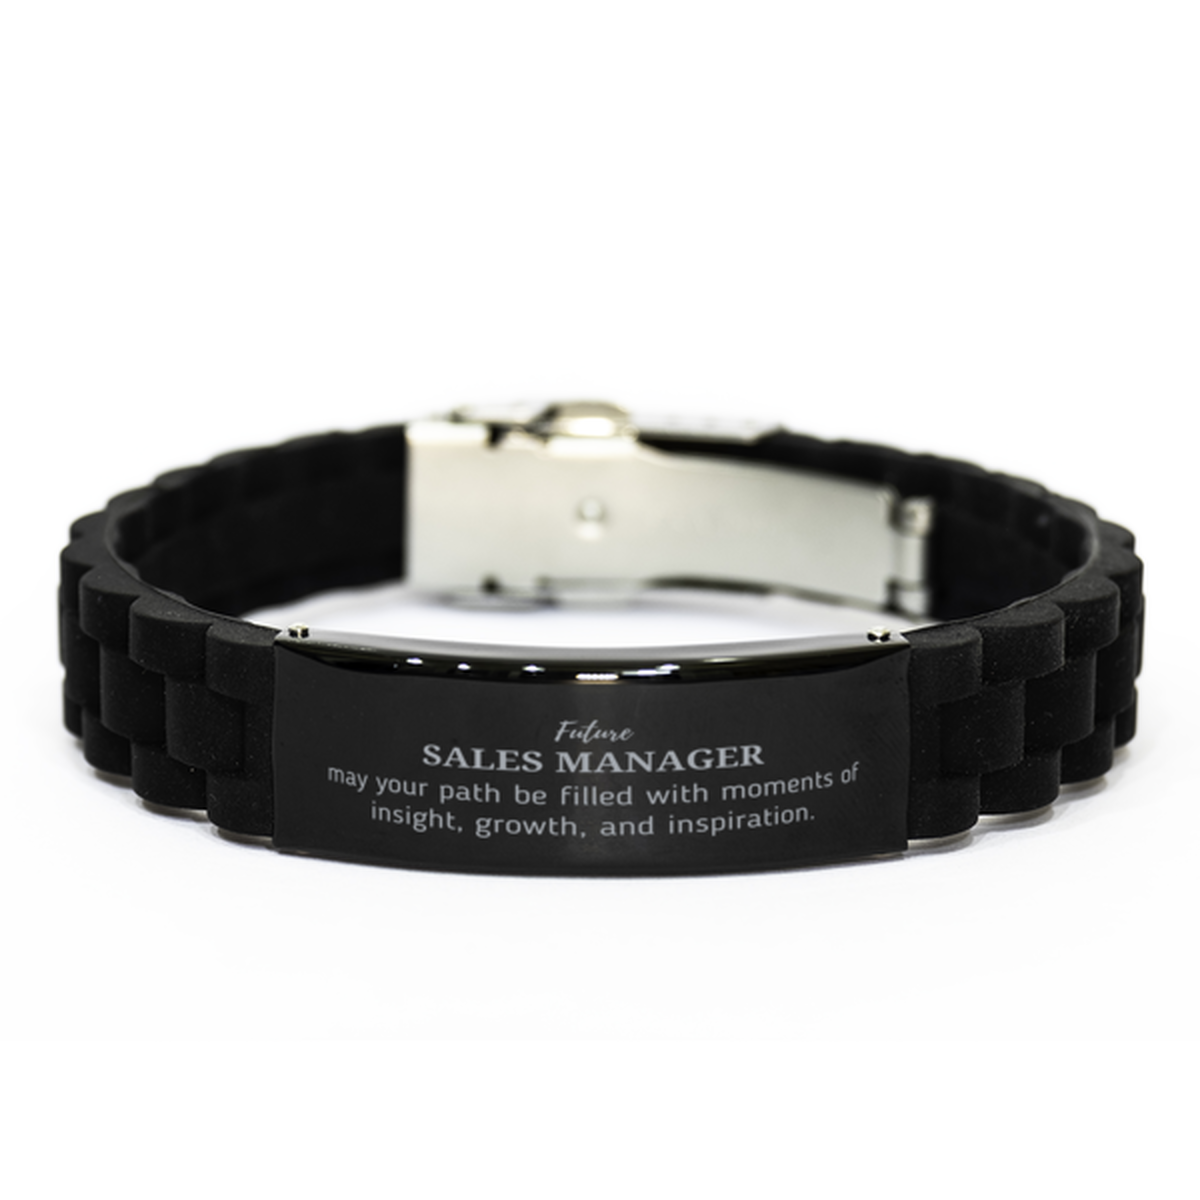 Future Sales Manager Gifts, May your path be filled with moments of insight, Graduation Gifts for New Sales Manager, Christmas Unique Black Glidelock Clasp Bracelet For Men, Women, Friends